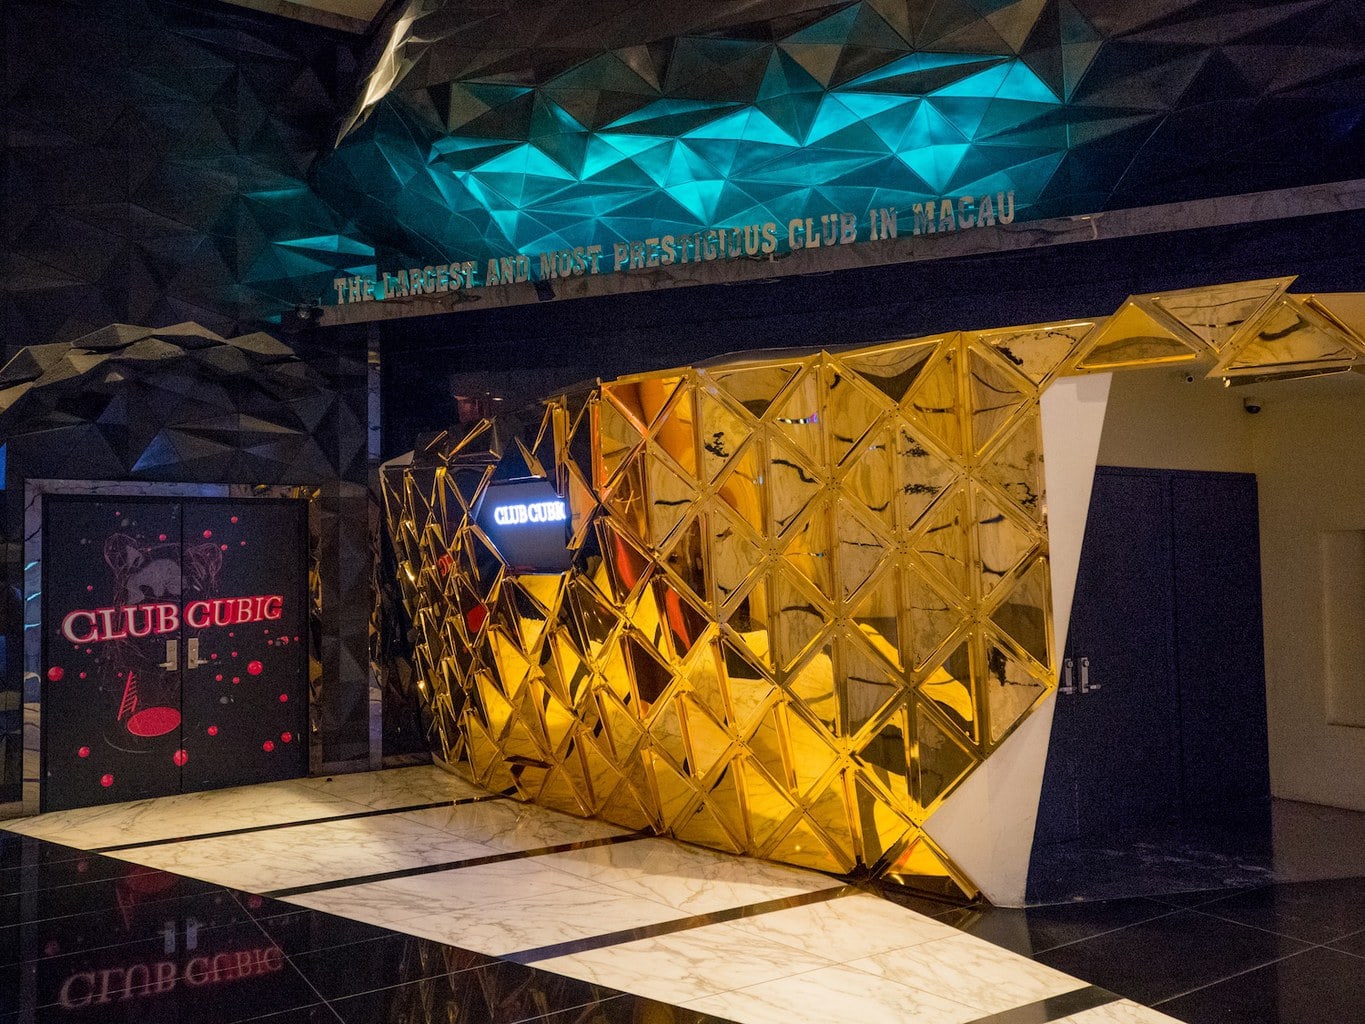 Looking for a party on your day trip to Macau - try CUBIC Club